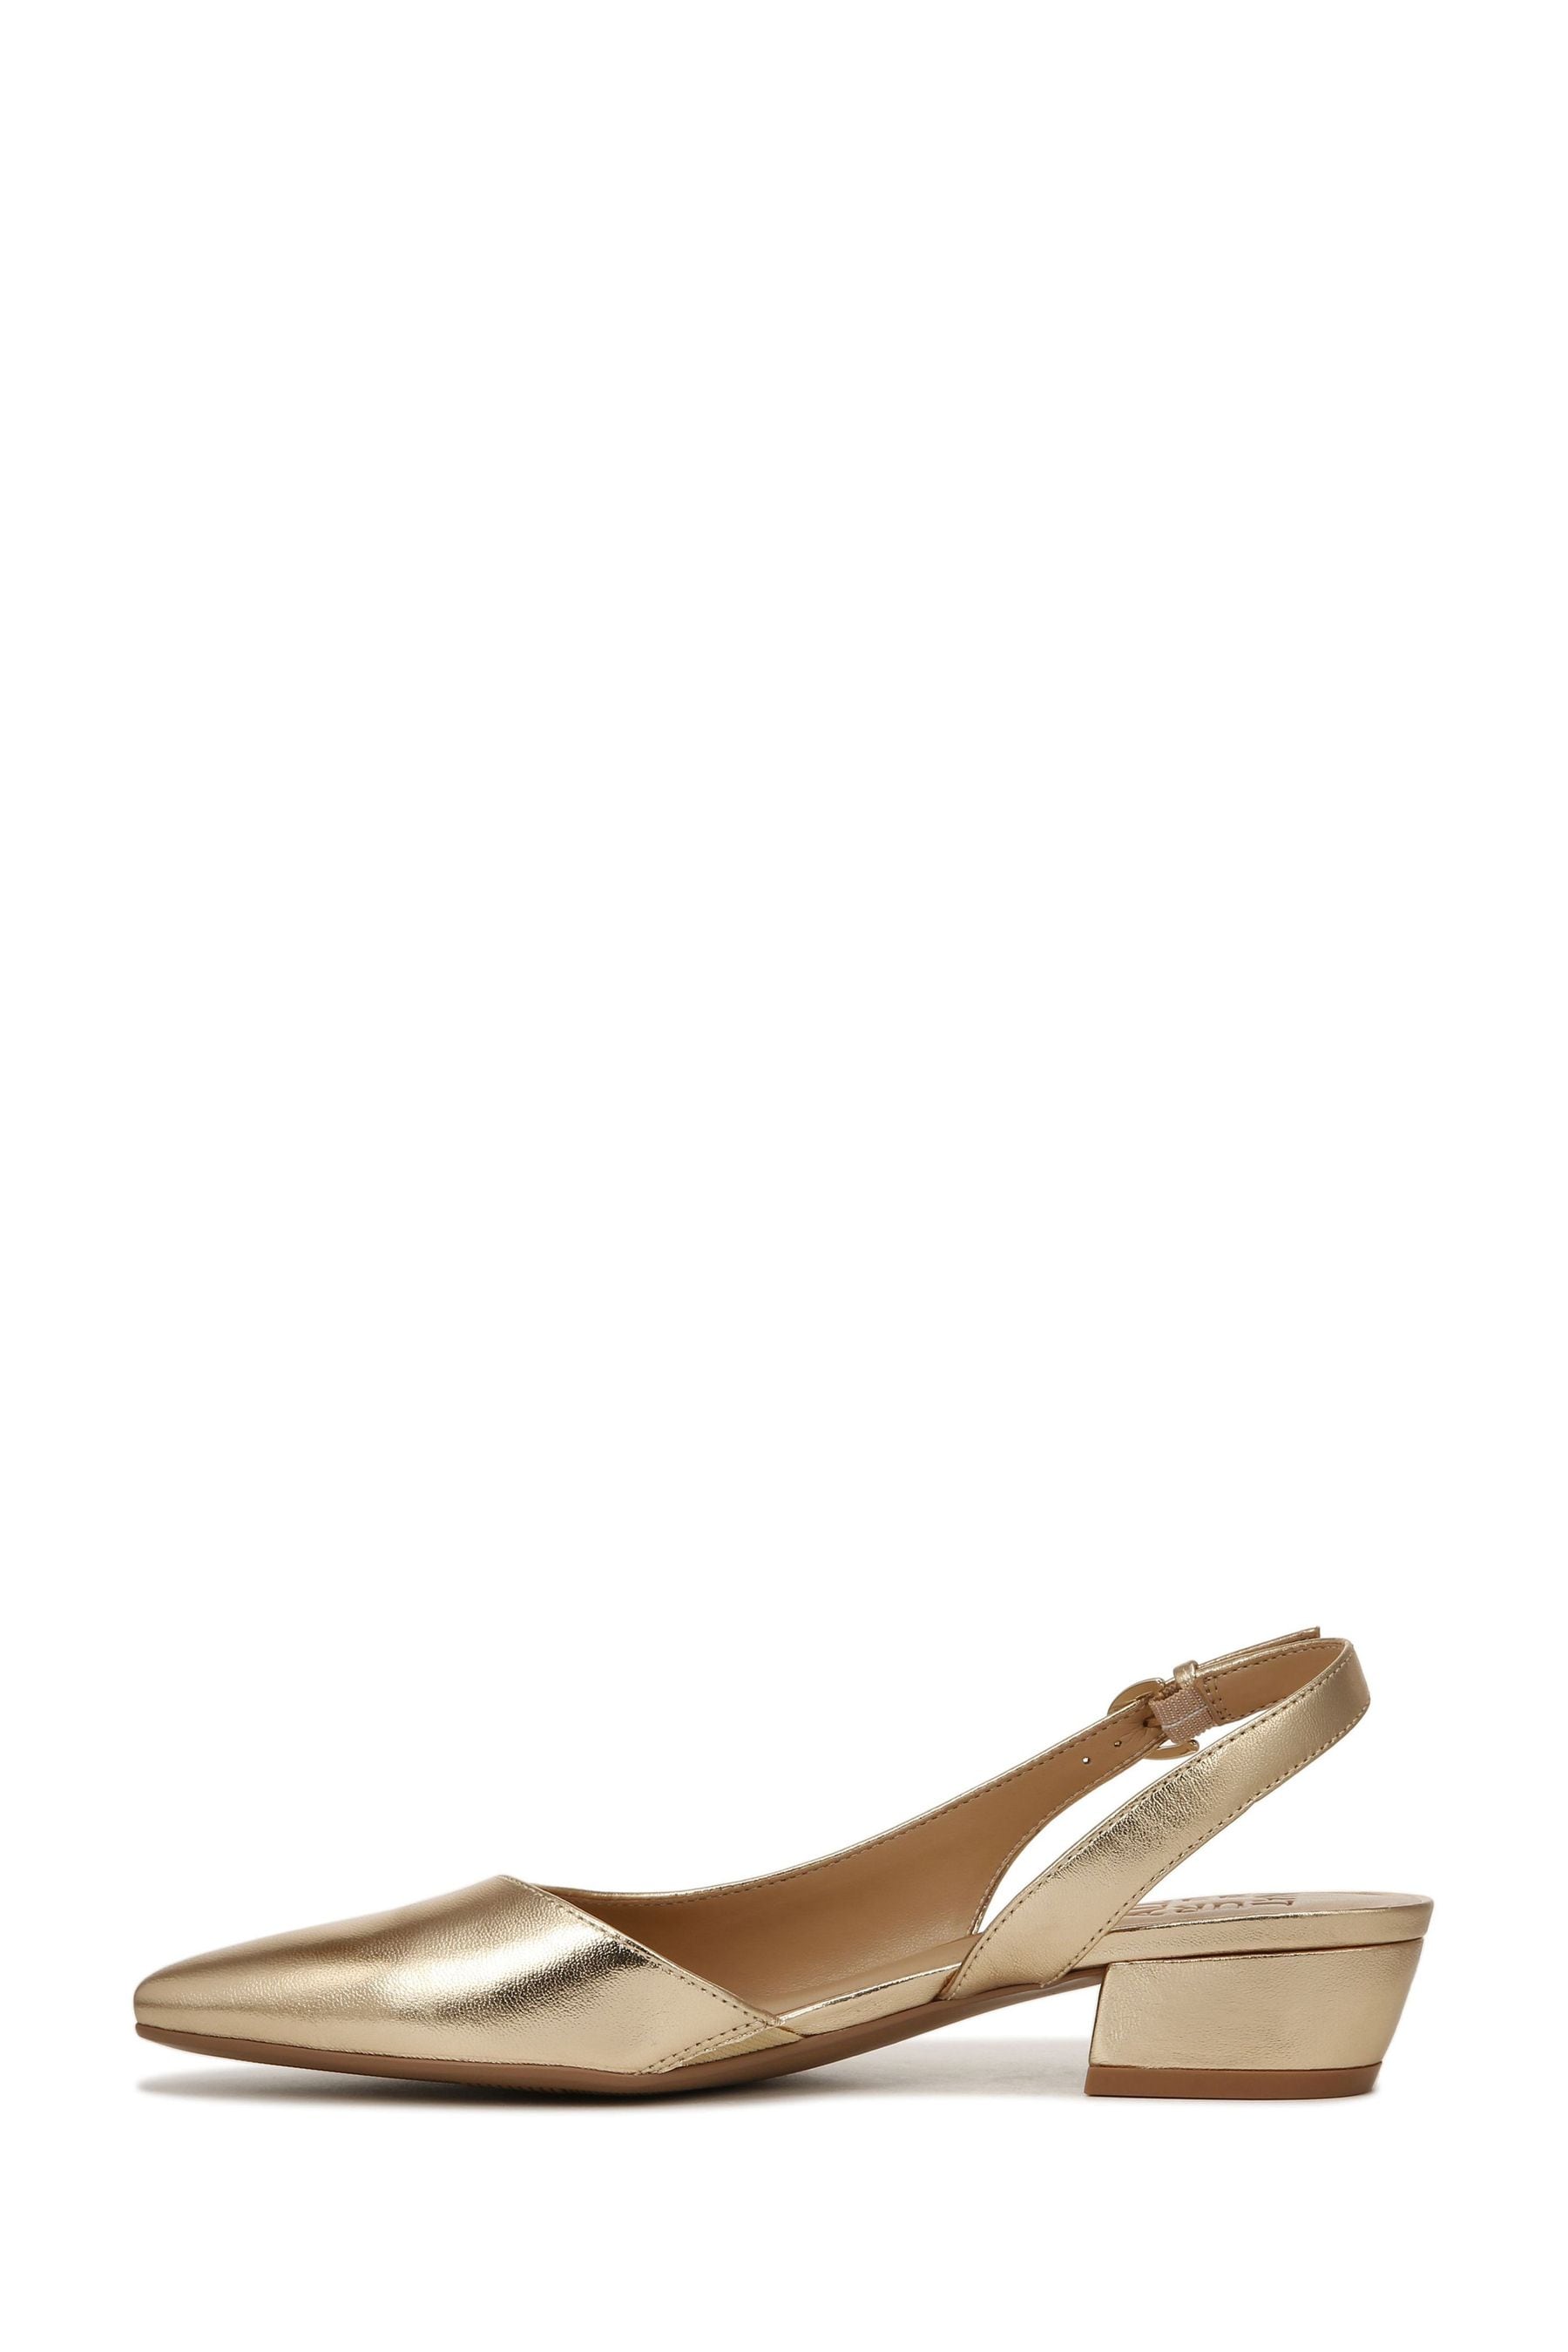 Buy Naturalizer Gold Bank Slingback Shoes from the Next UK online shop